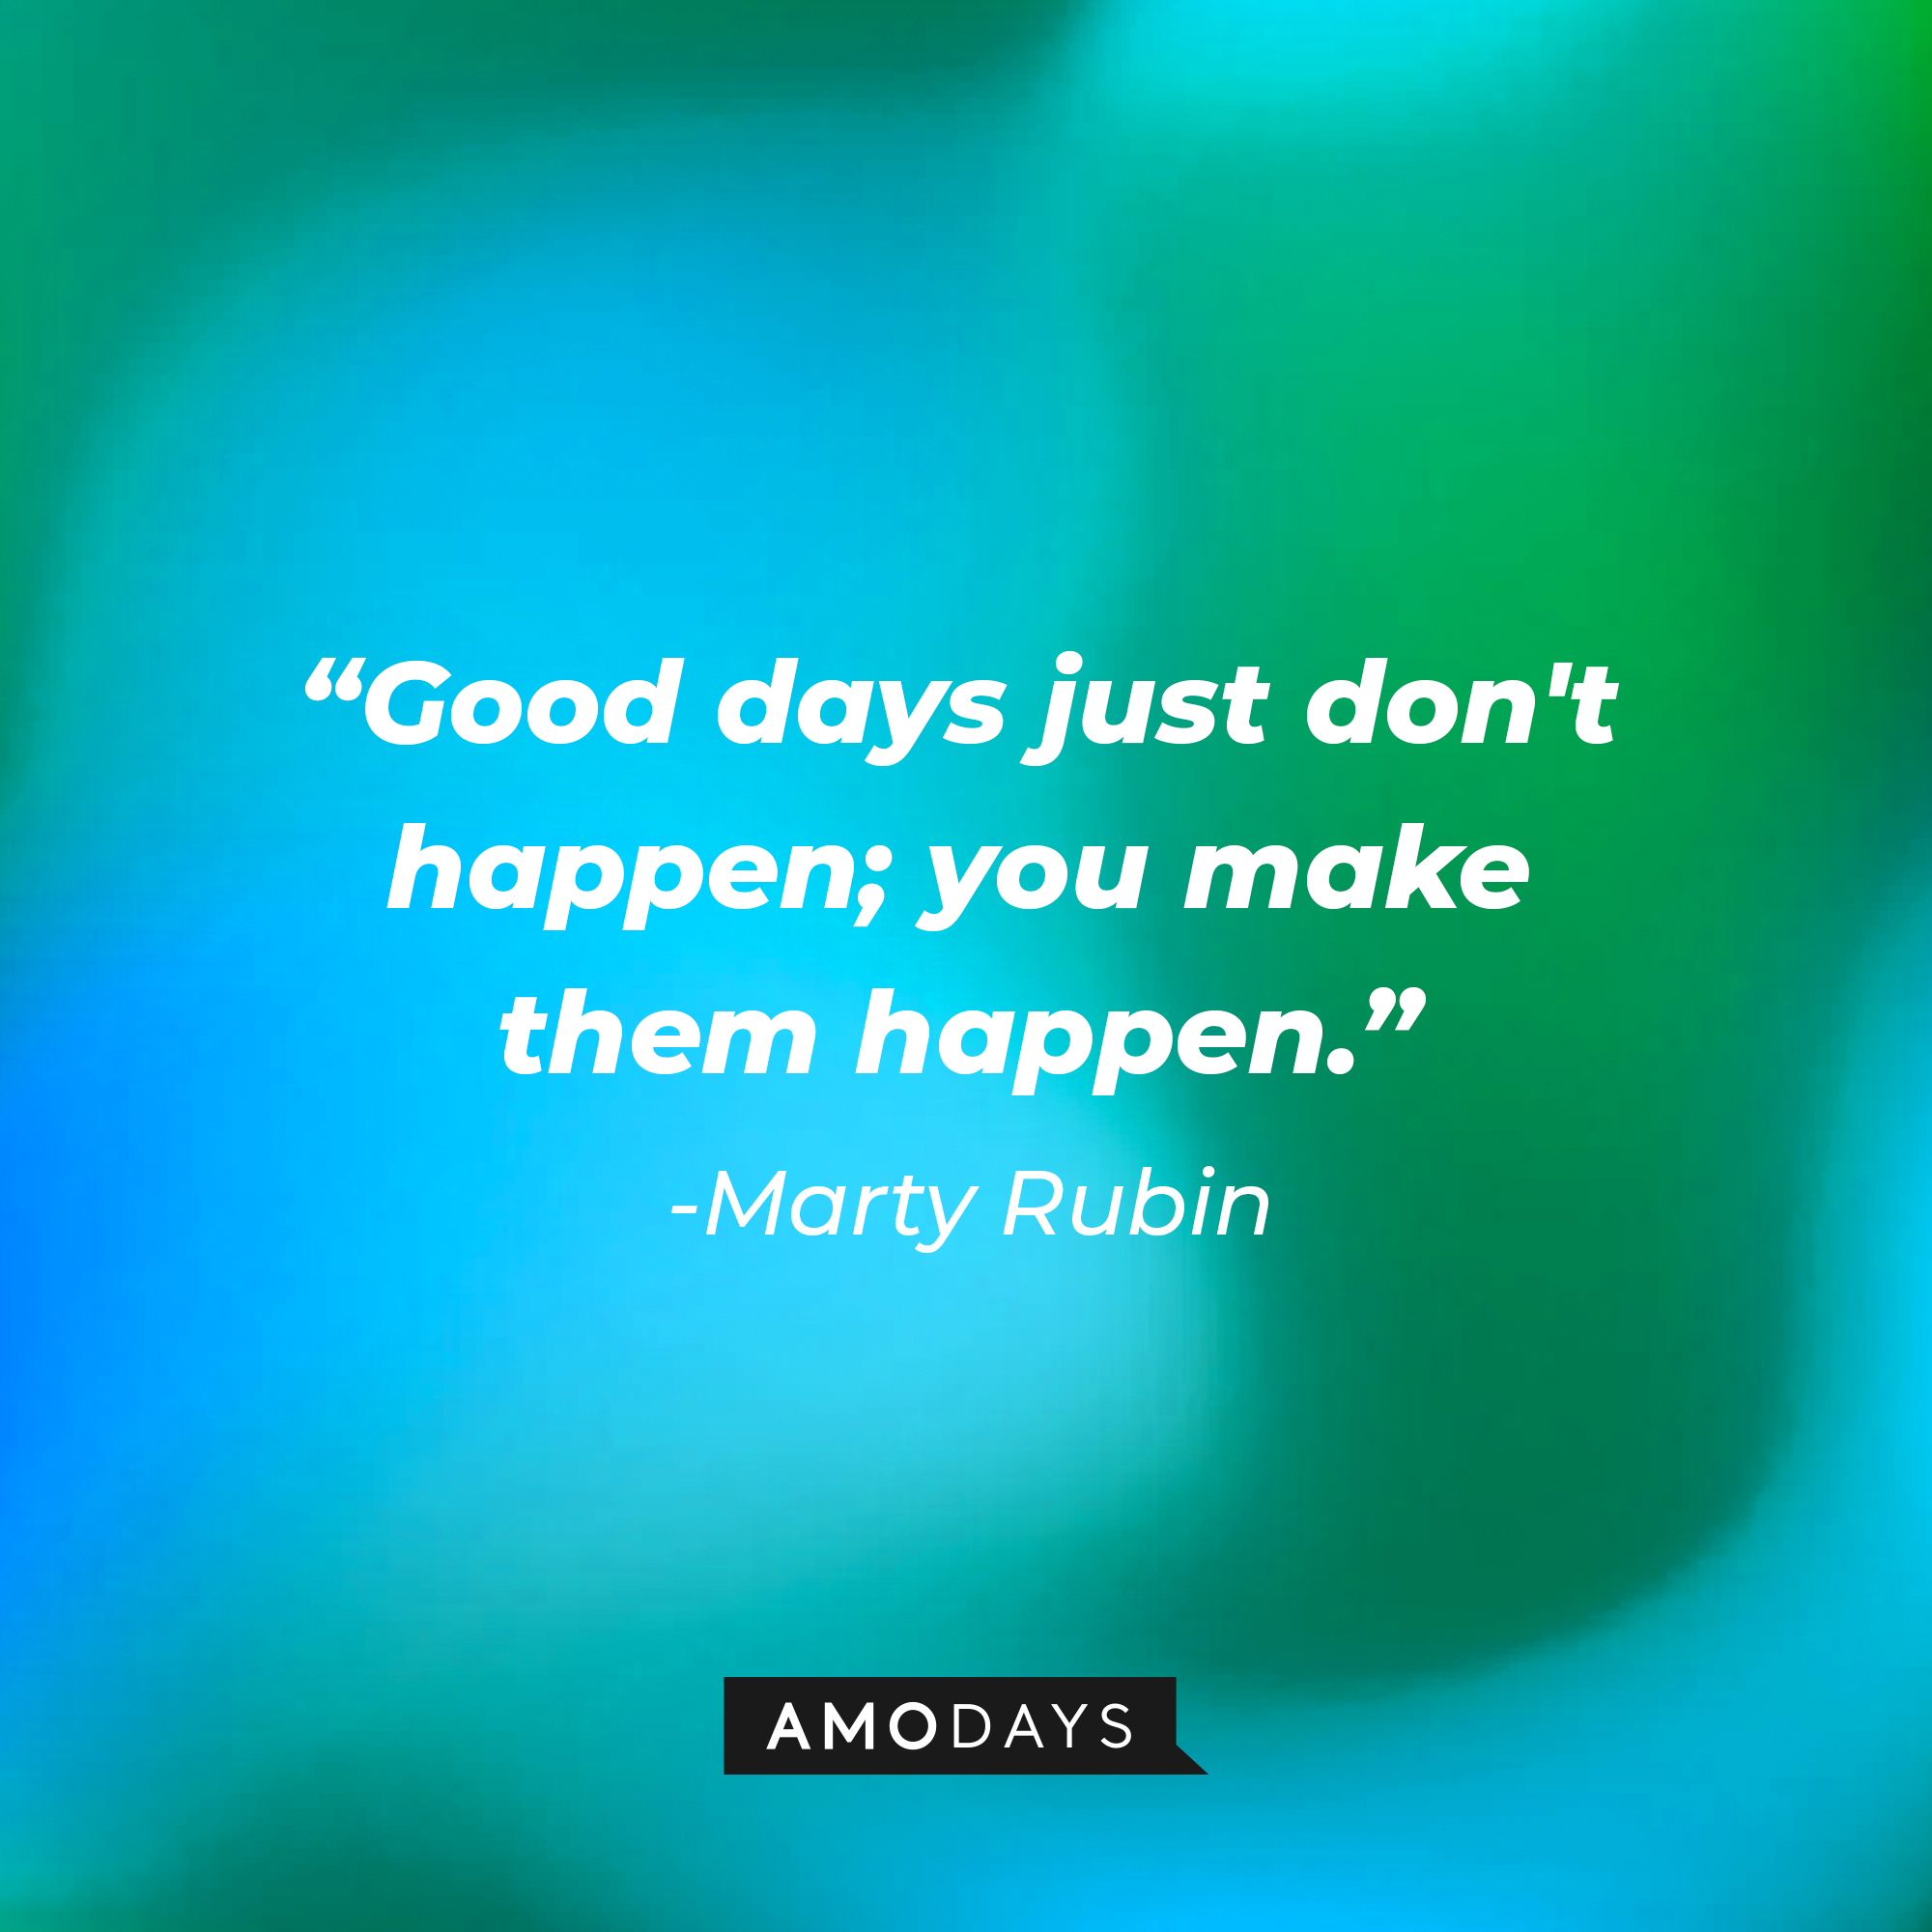 Marty Rubin's quote: "Good days just don't happen; you make them happen."  | Image: Amodays